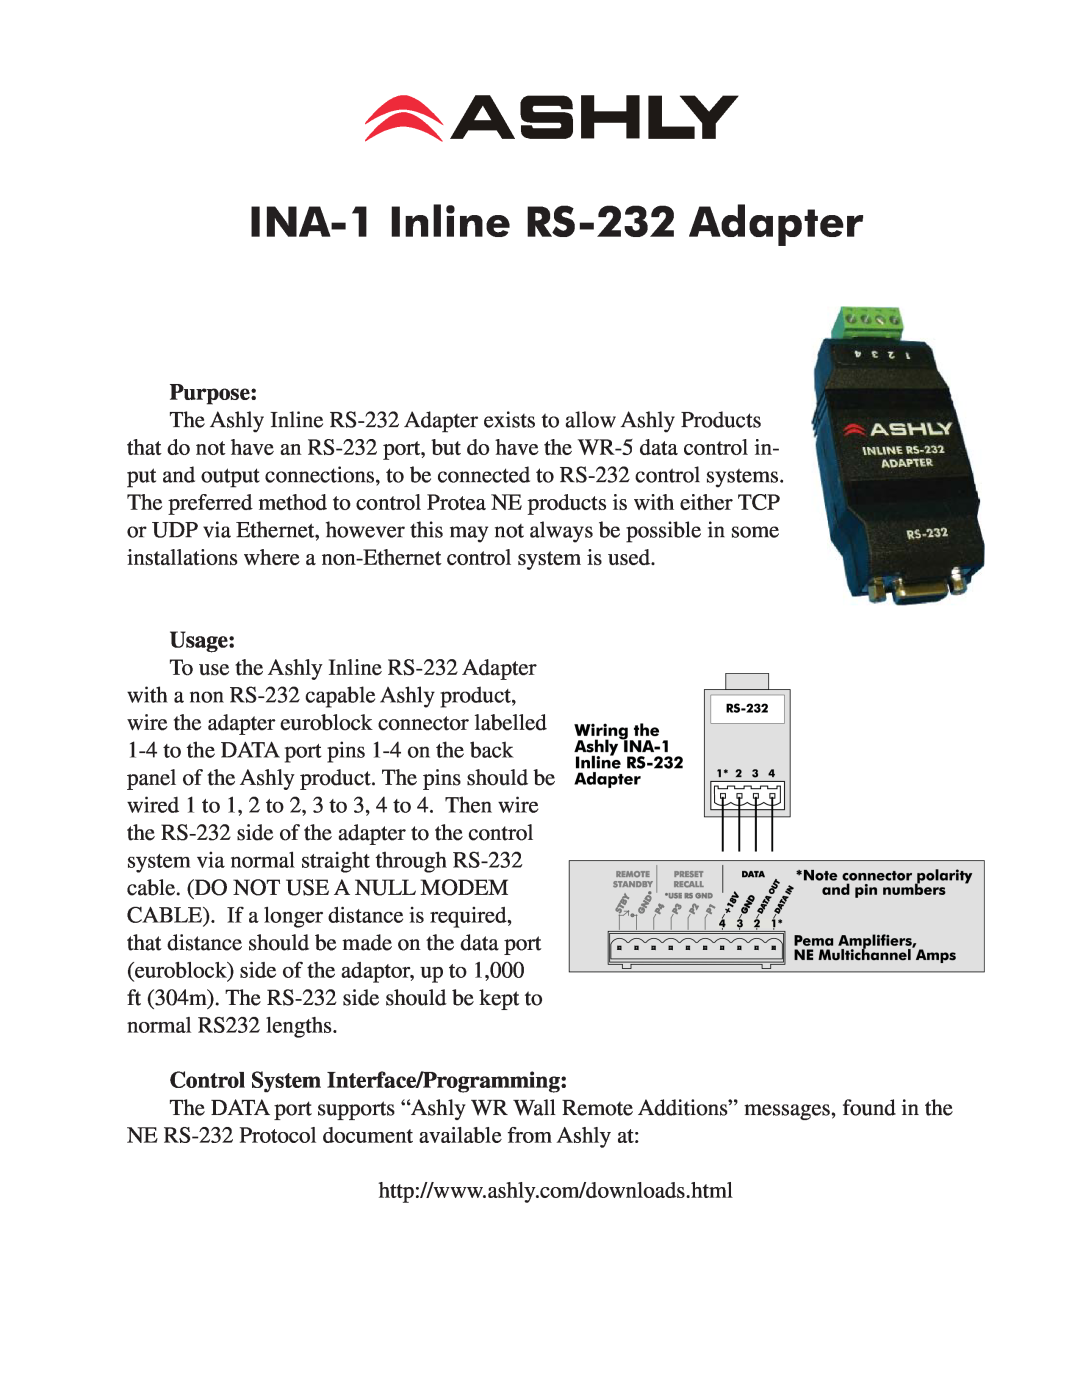 Ashly manual INA-1 Inline RS-232 Adapter, Purpose, Usage, Control System Interface/Programming 